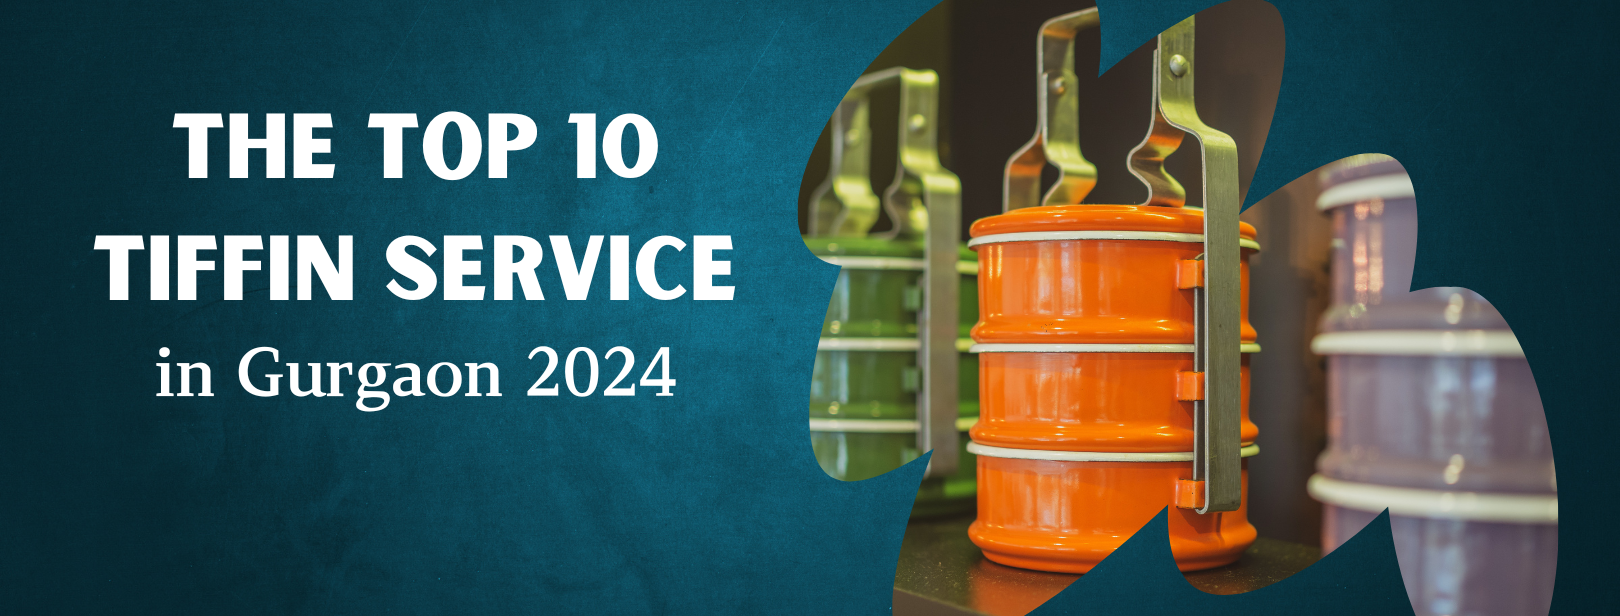 The Top 10 Tiffin Services in Gurgaon in  2024